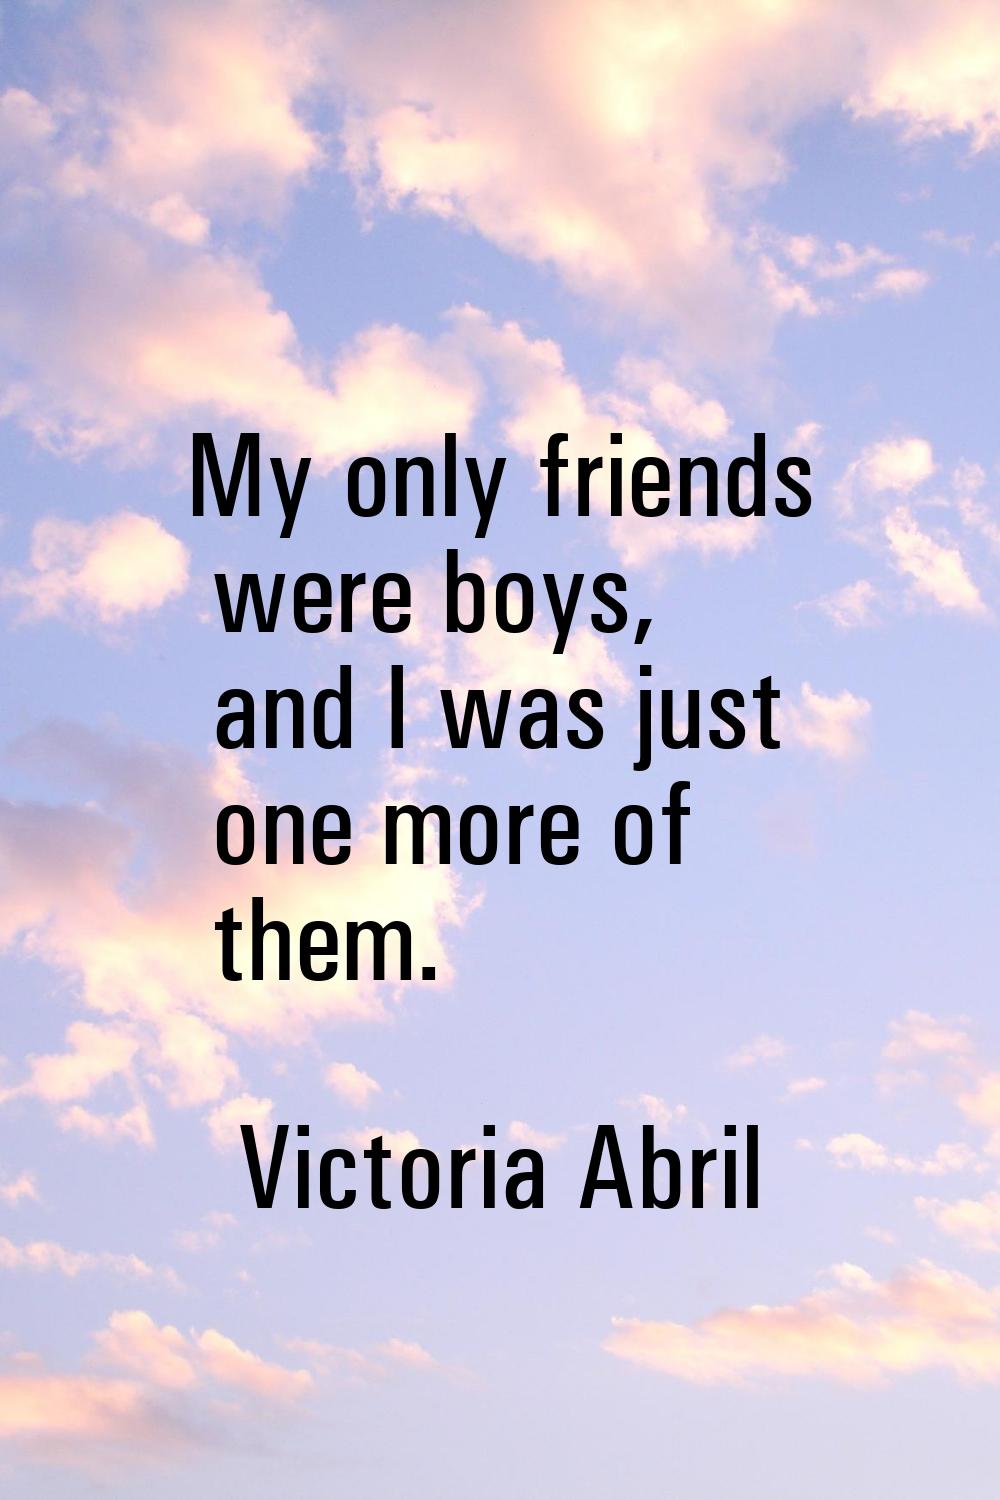 My only friends were boys, and I was just one more of them.